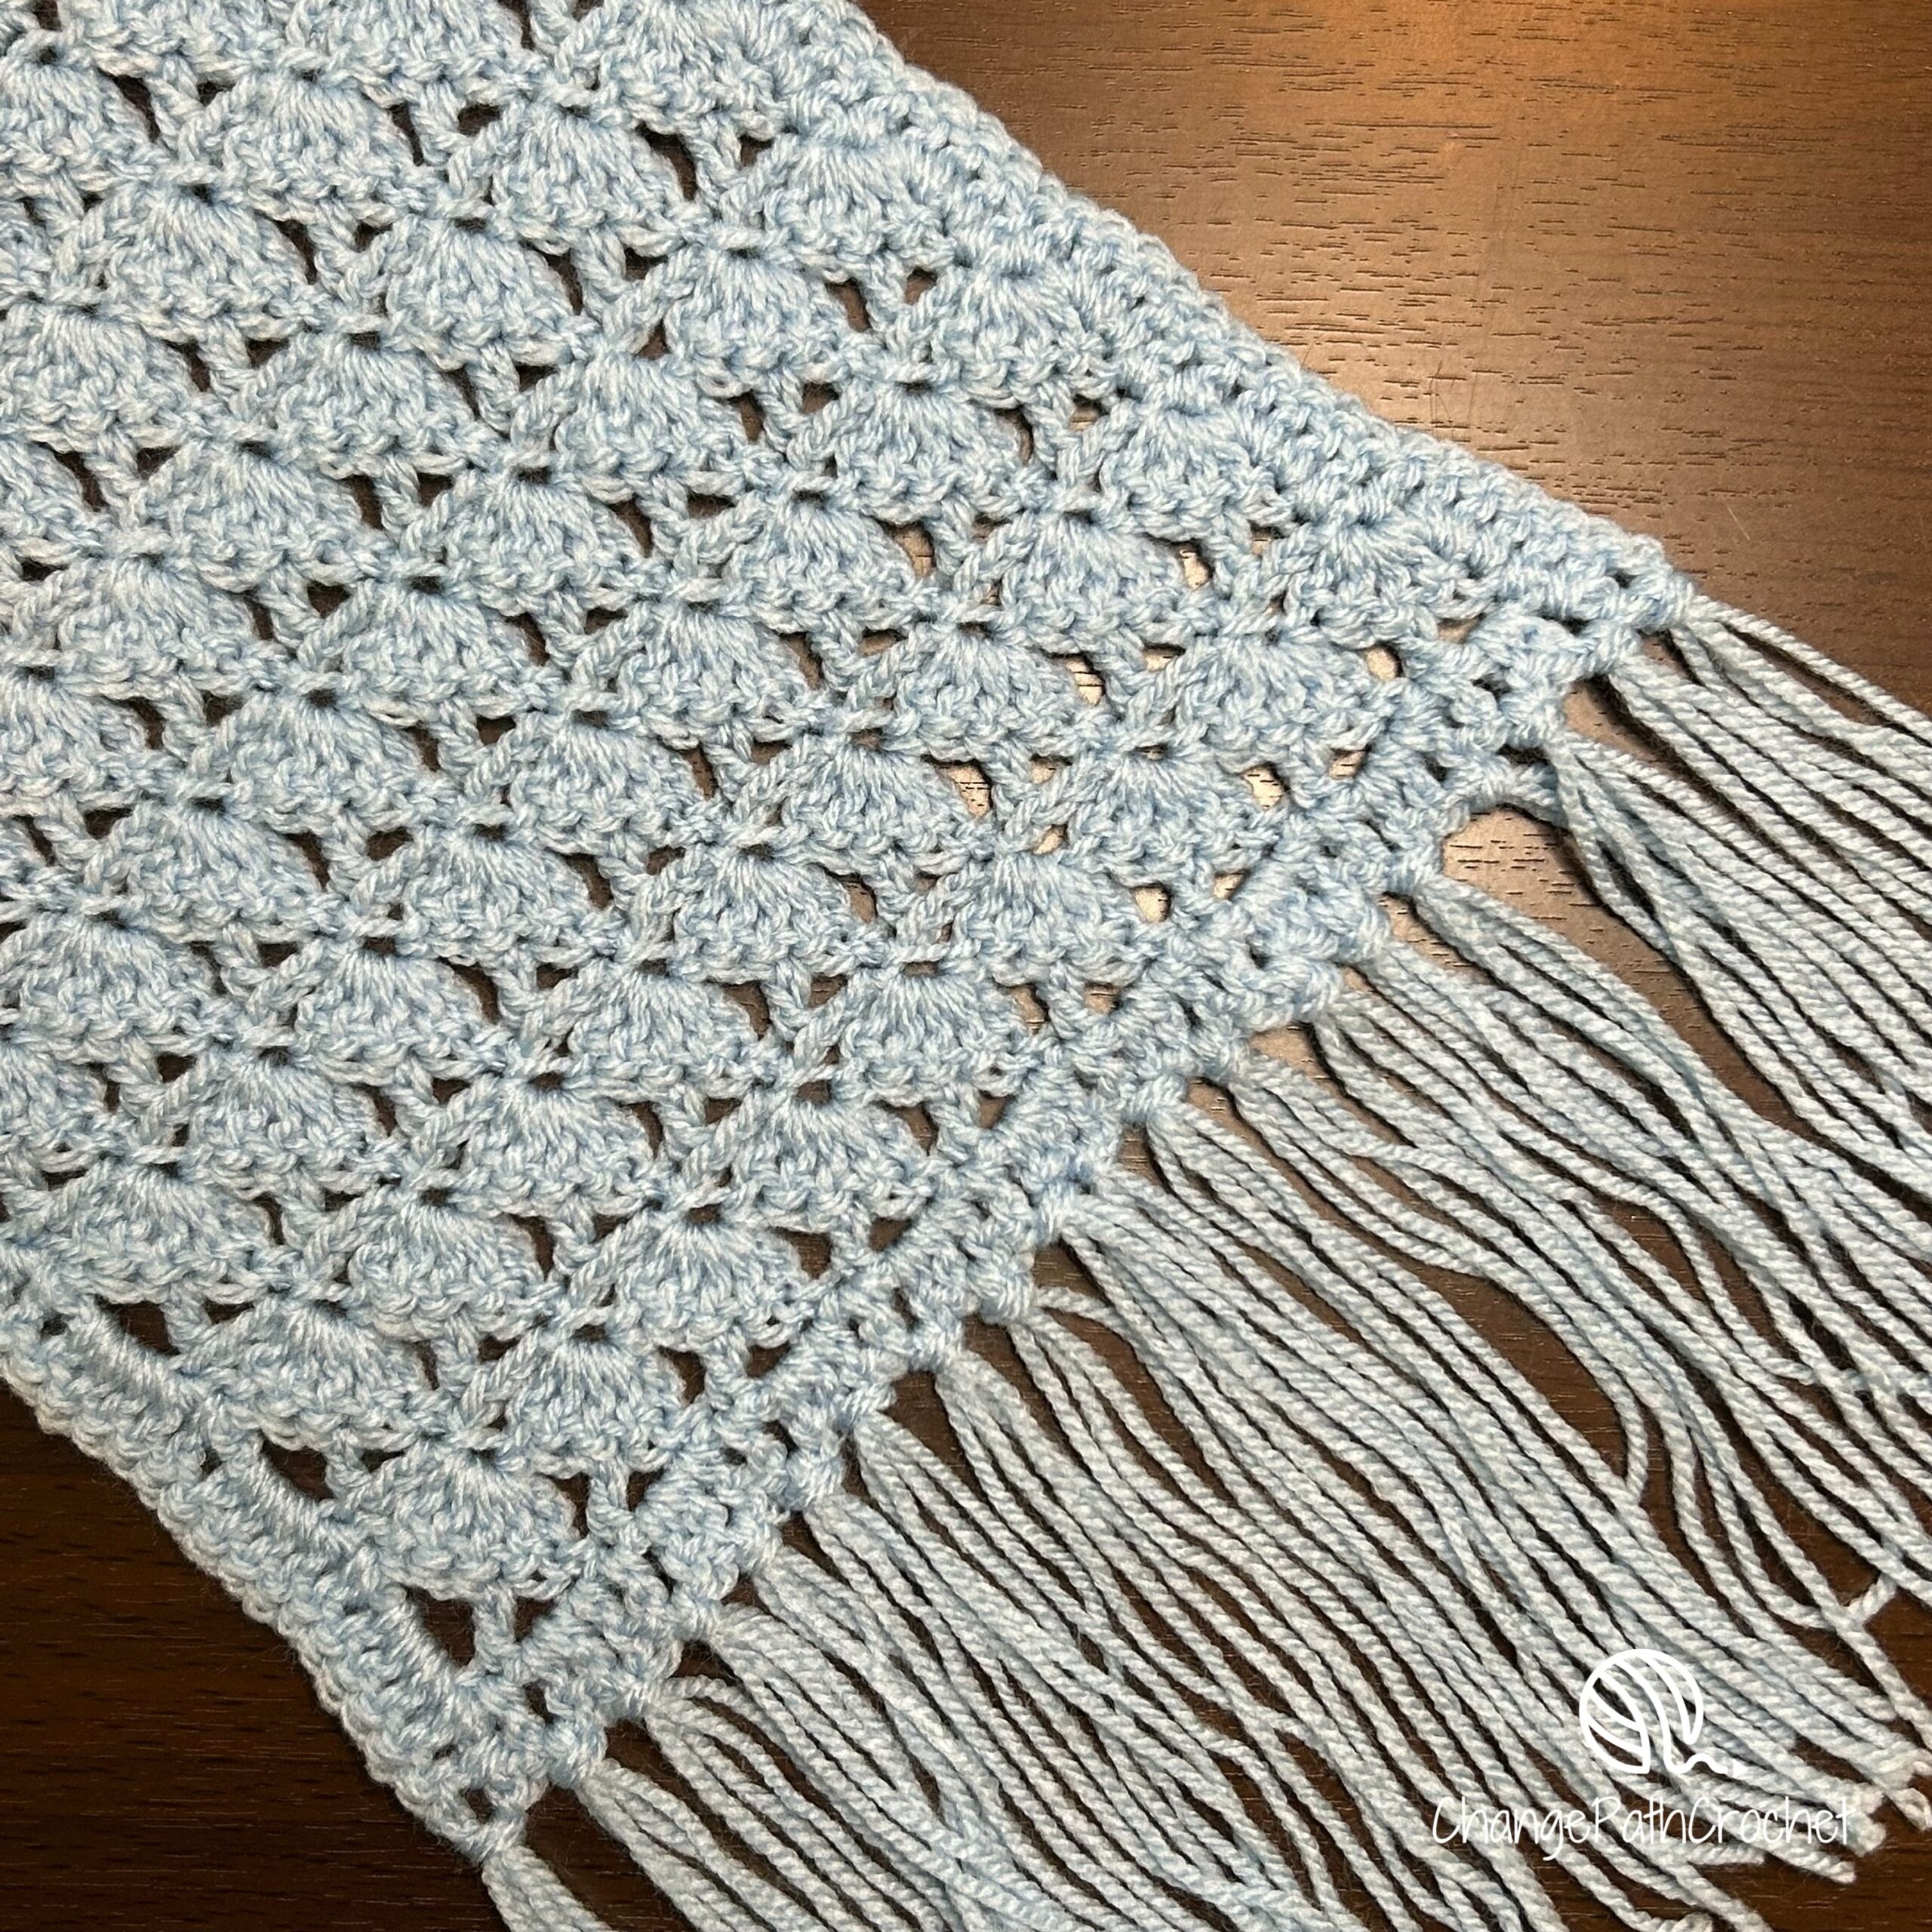 blue crocheted scarf with mushroom stitch and fringe